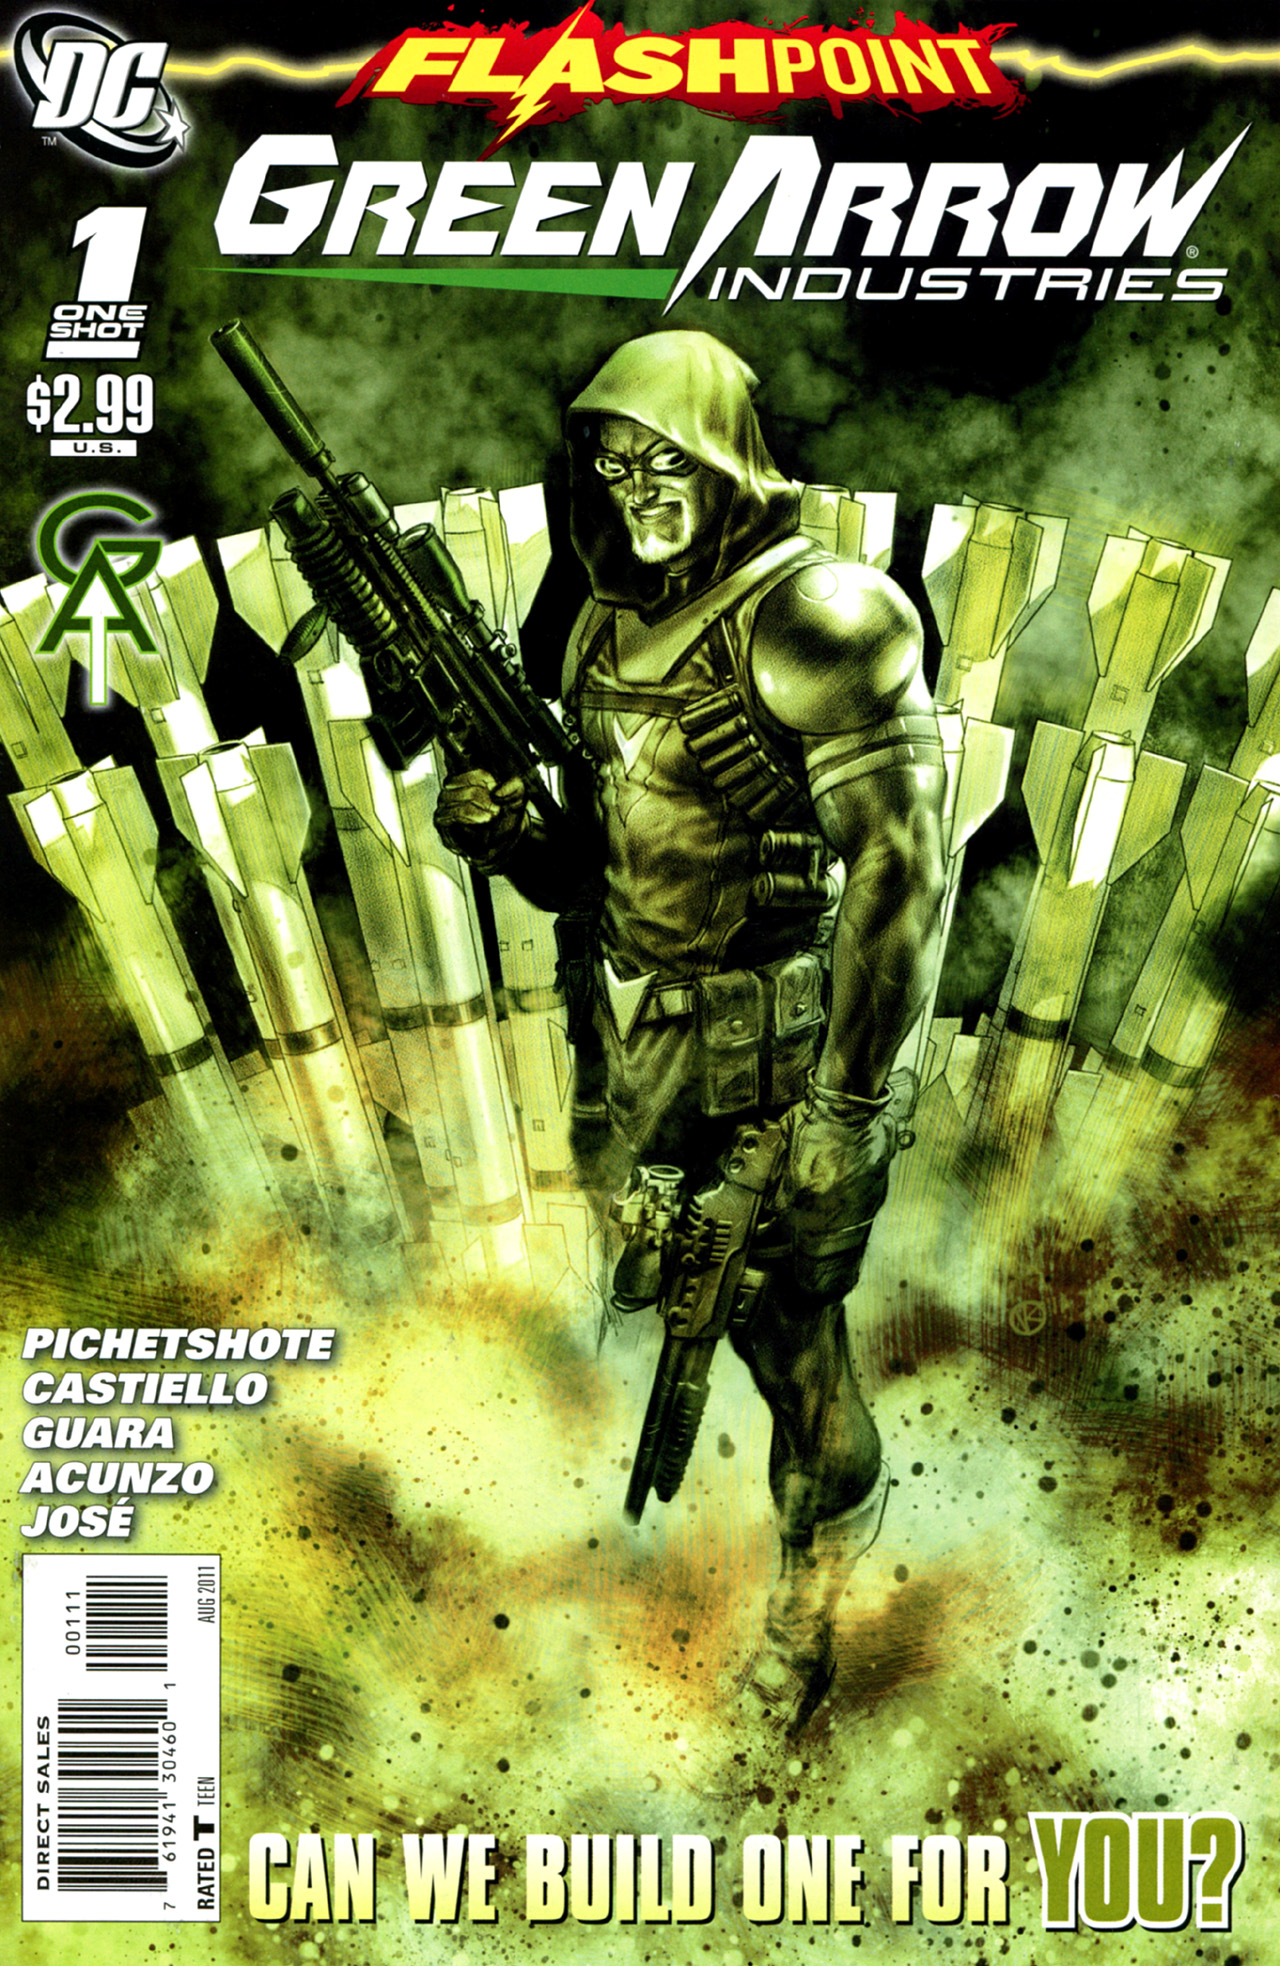 Read online Flashpoint: Green Arrow Industries comic -  Issue # Full - 1